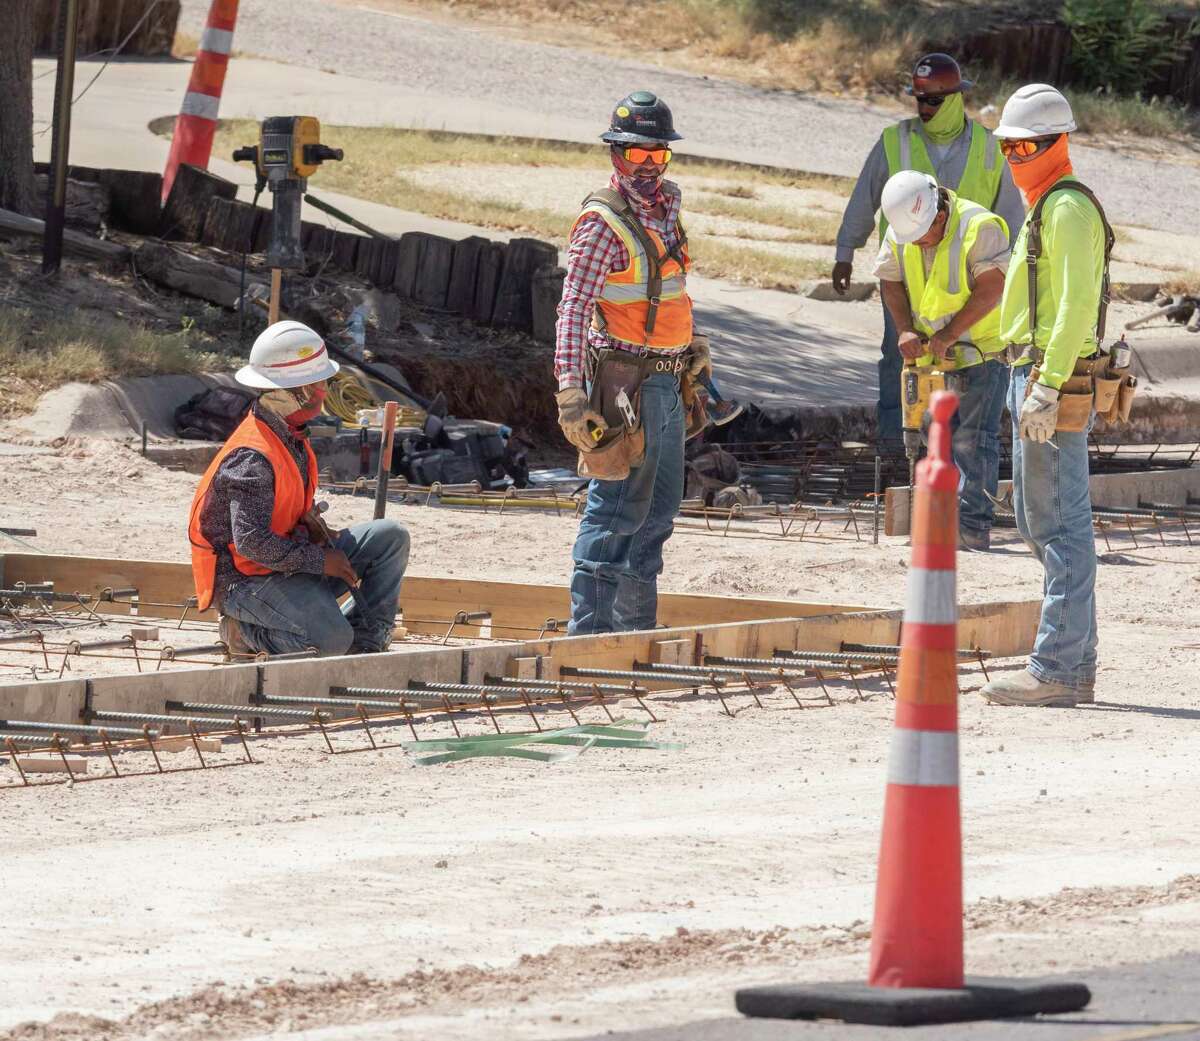 Workers dress in long sleeves, pants and masks in July as they try to stay cool in the 100-degree temperatures as they work on North "A" Street. Tim Fischer/Reporter-Telegram